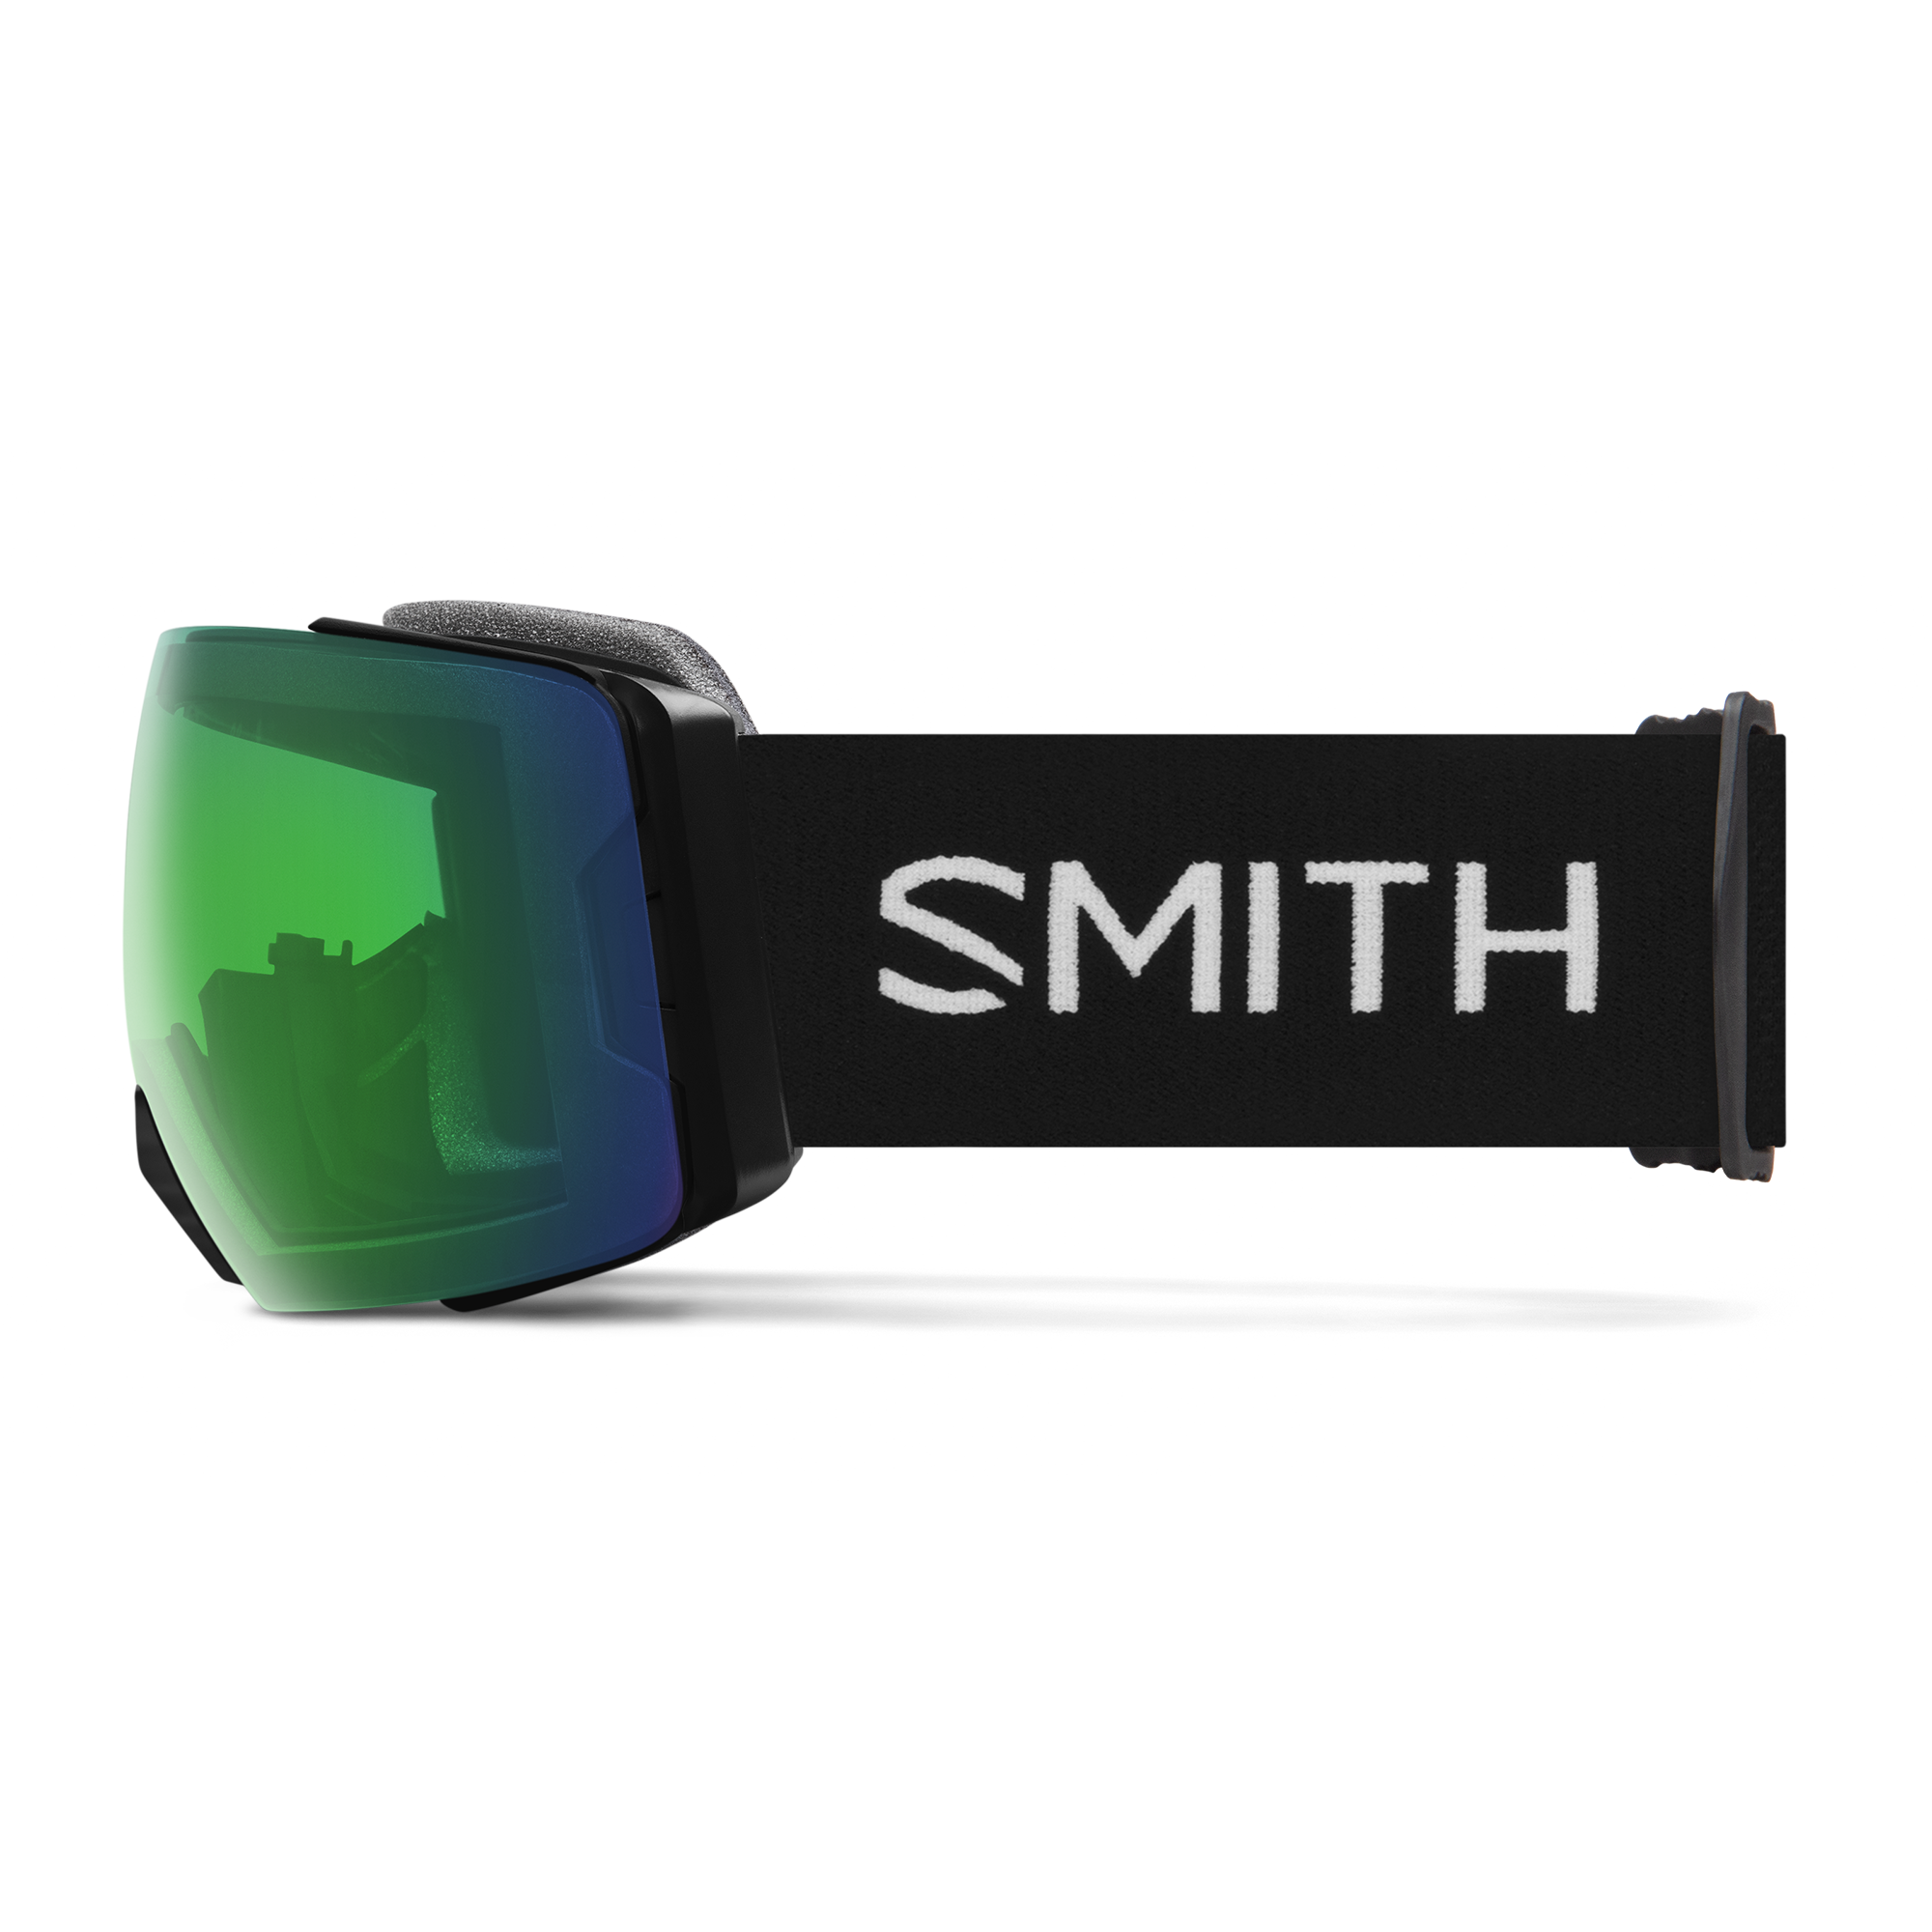 Smith ski goggles with green/blue lenses and black adjustable strap with Smith logo.